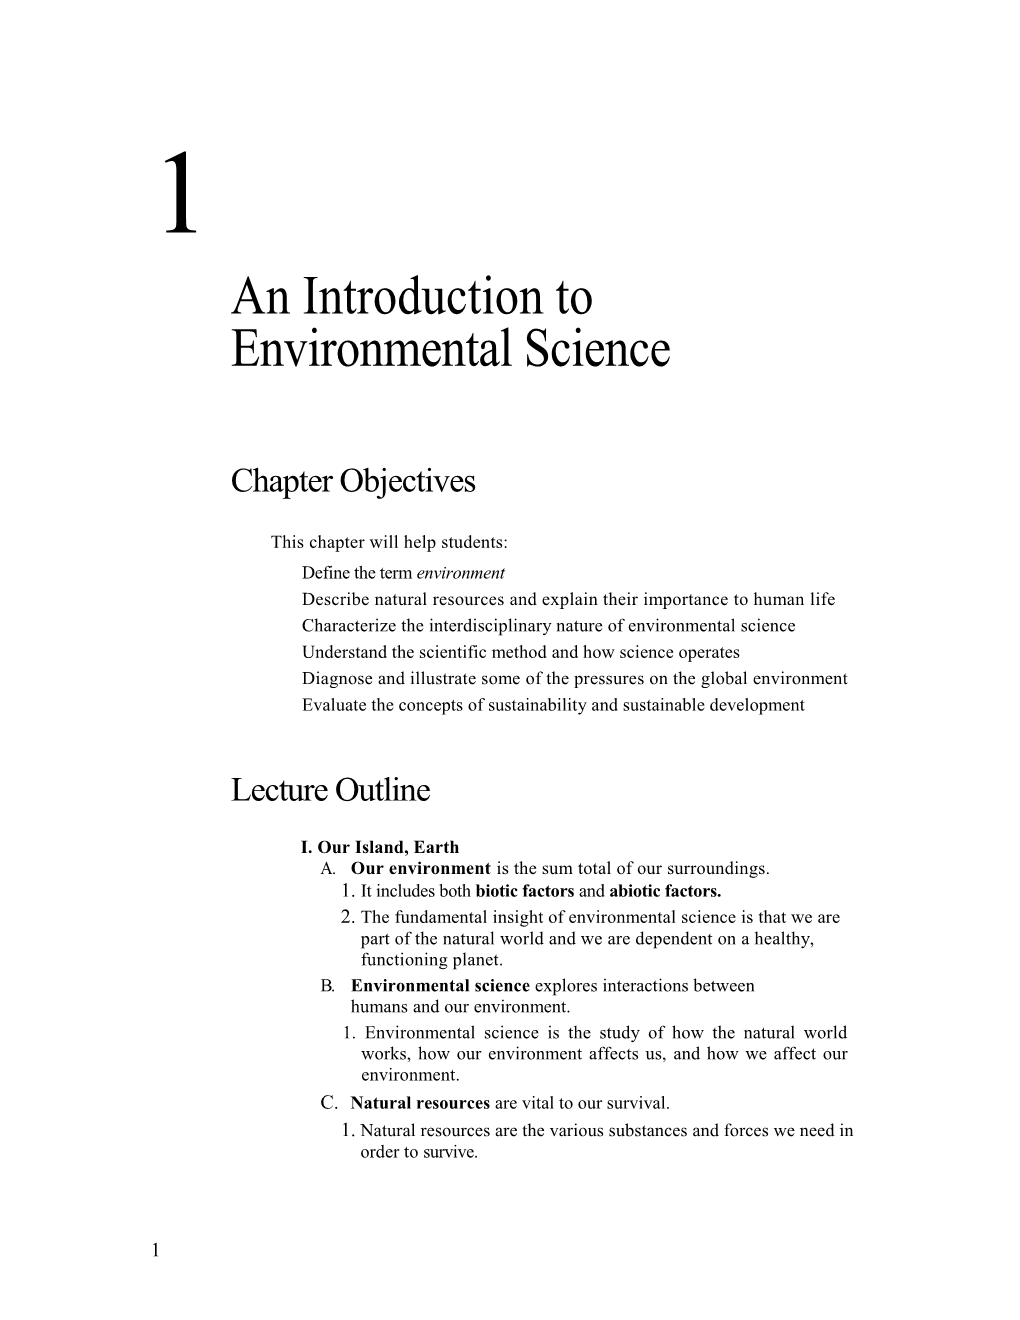 An Introduction to Environmental Science